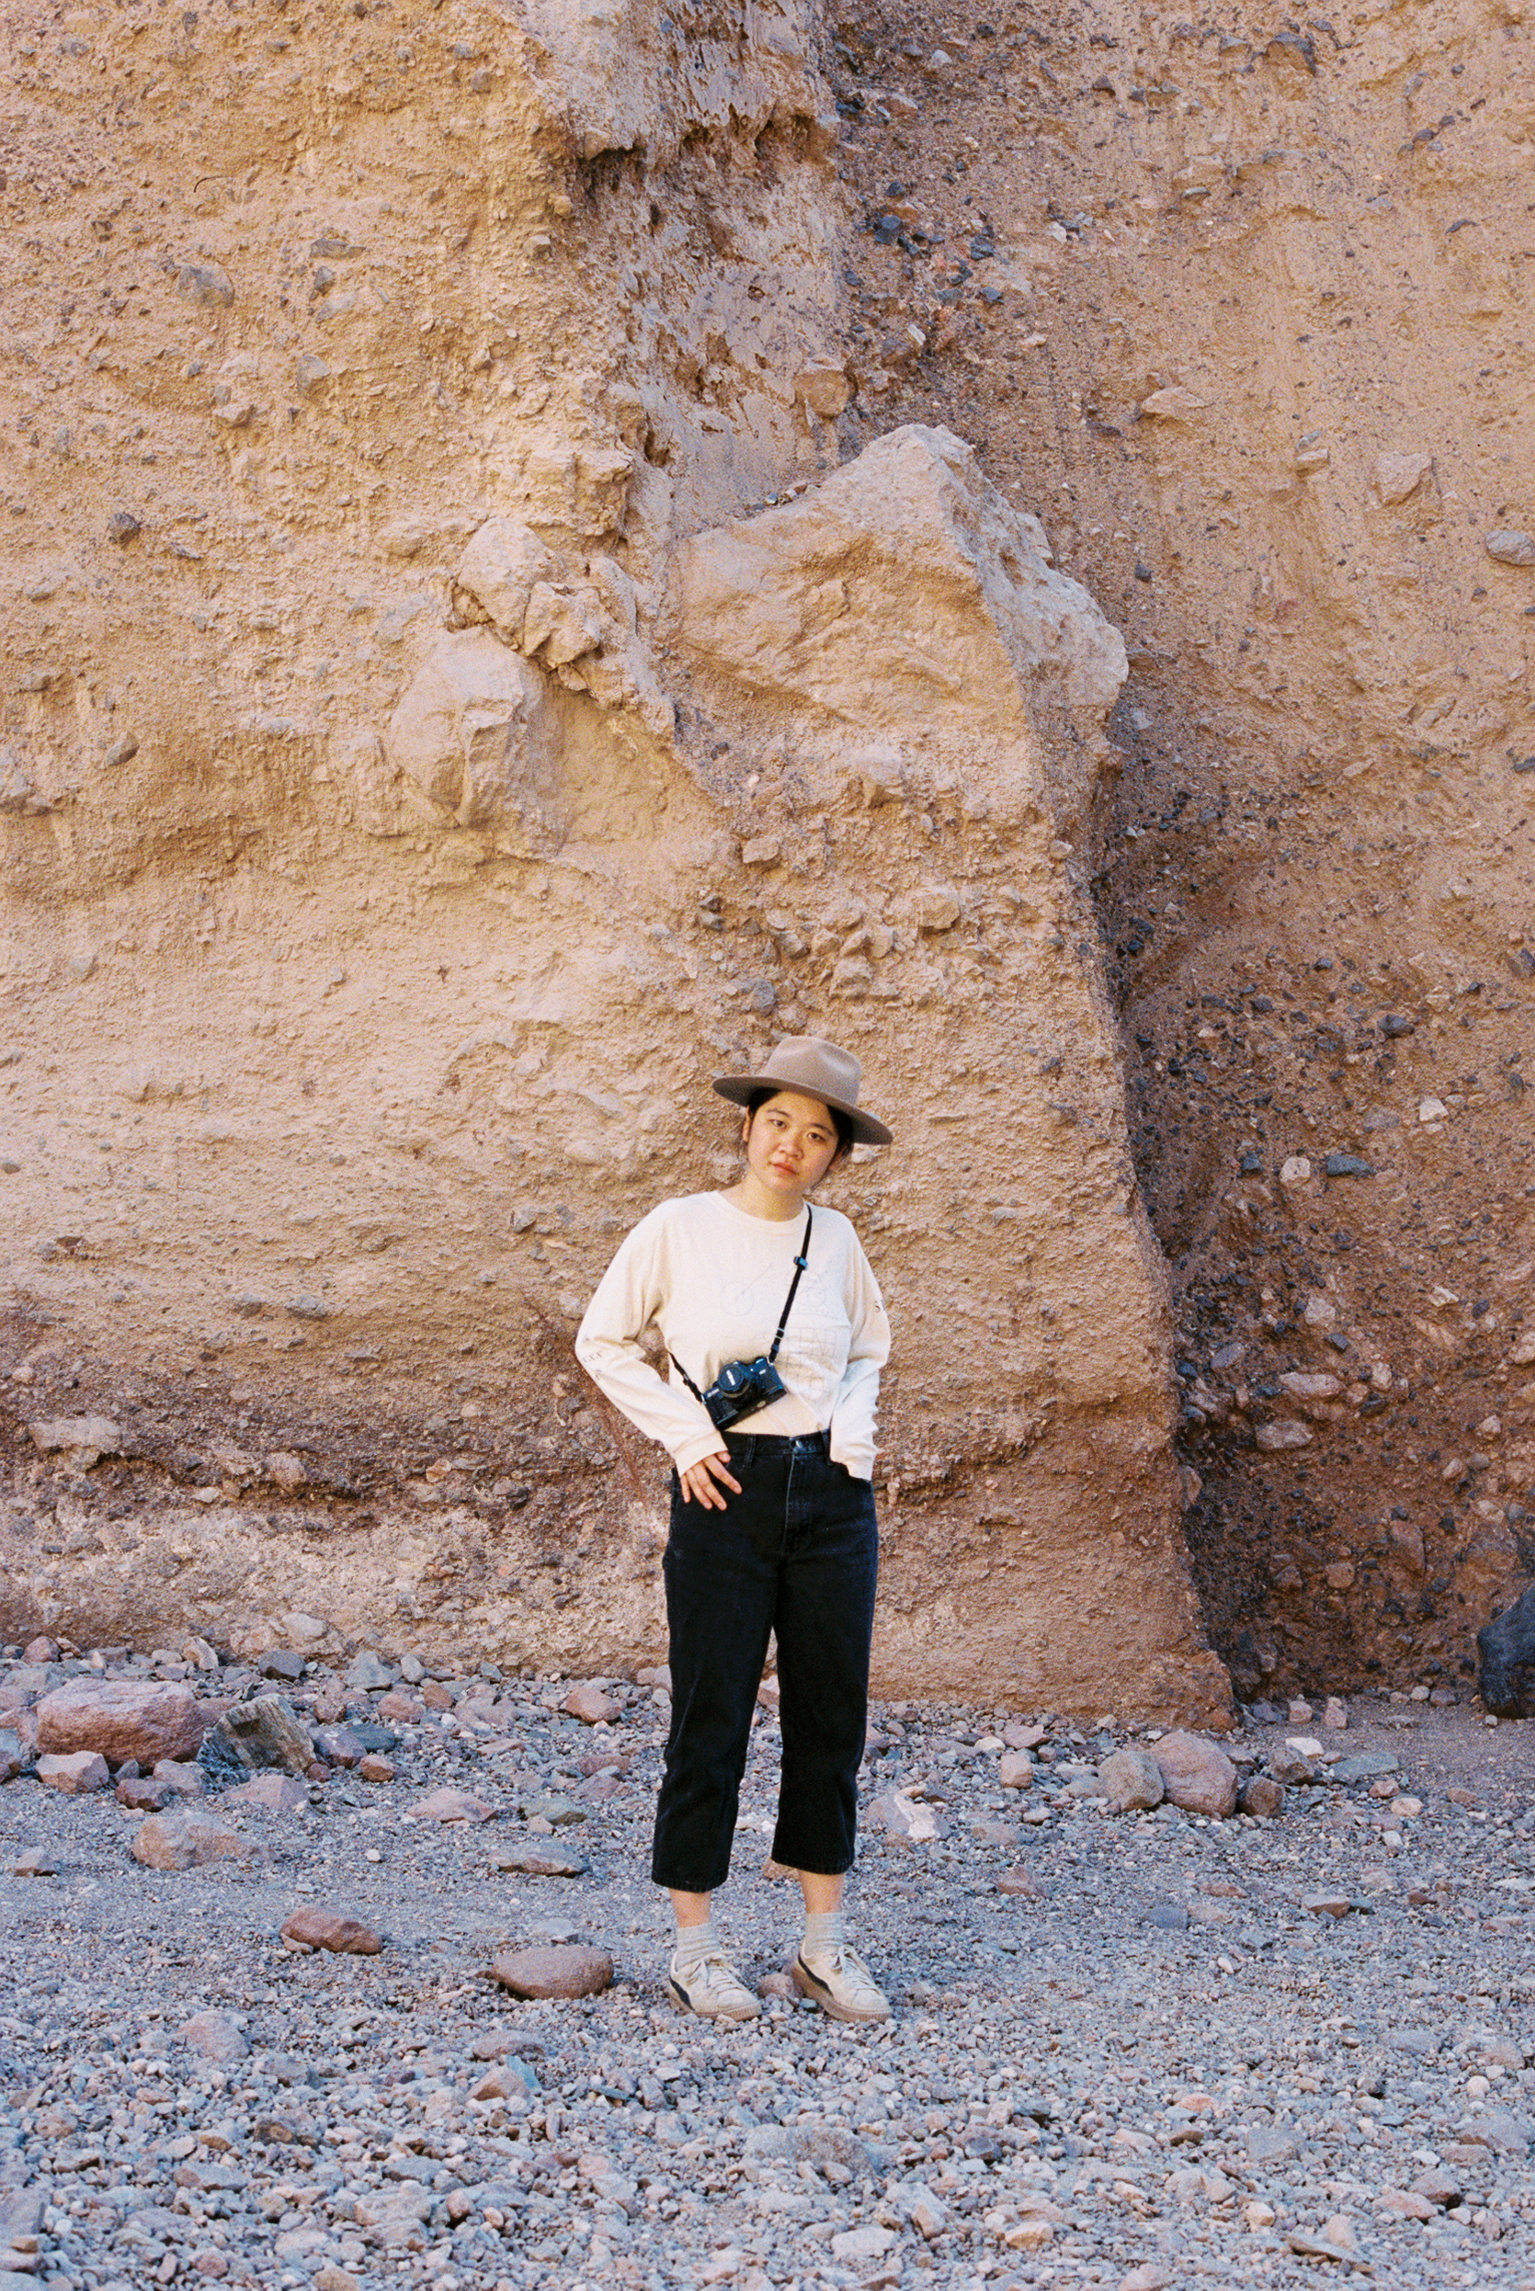  Jennelle in Death Valley, 2018. 